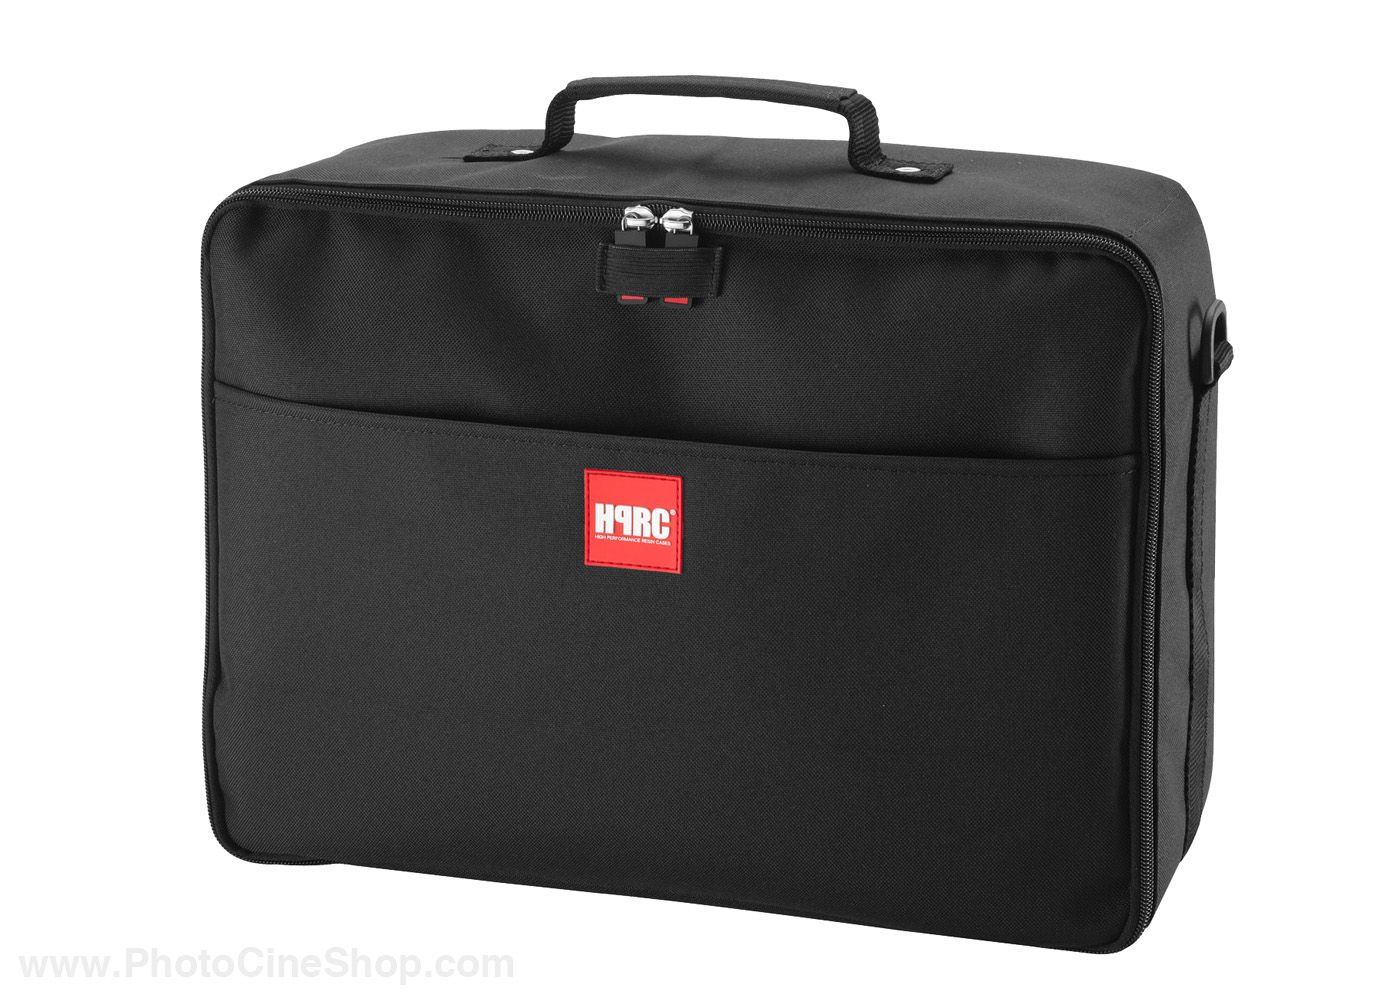 HPRC - Case 2460 with Bag and Dividers - Black